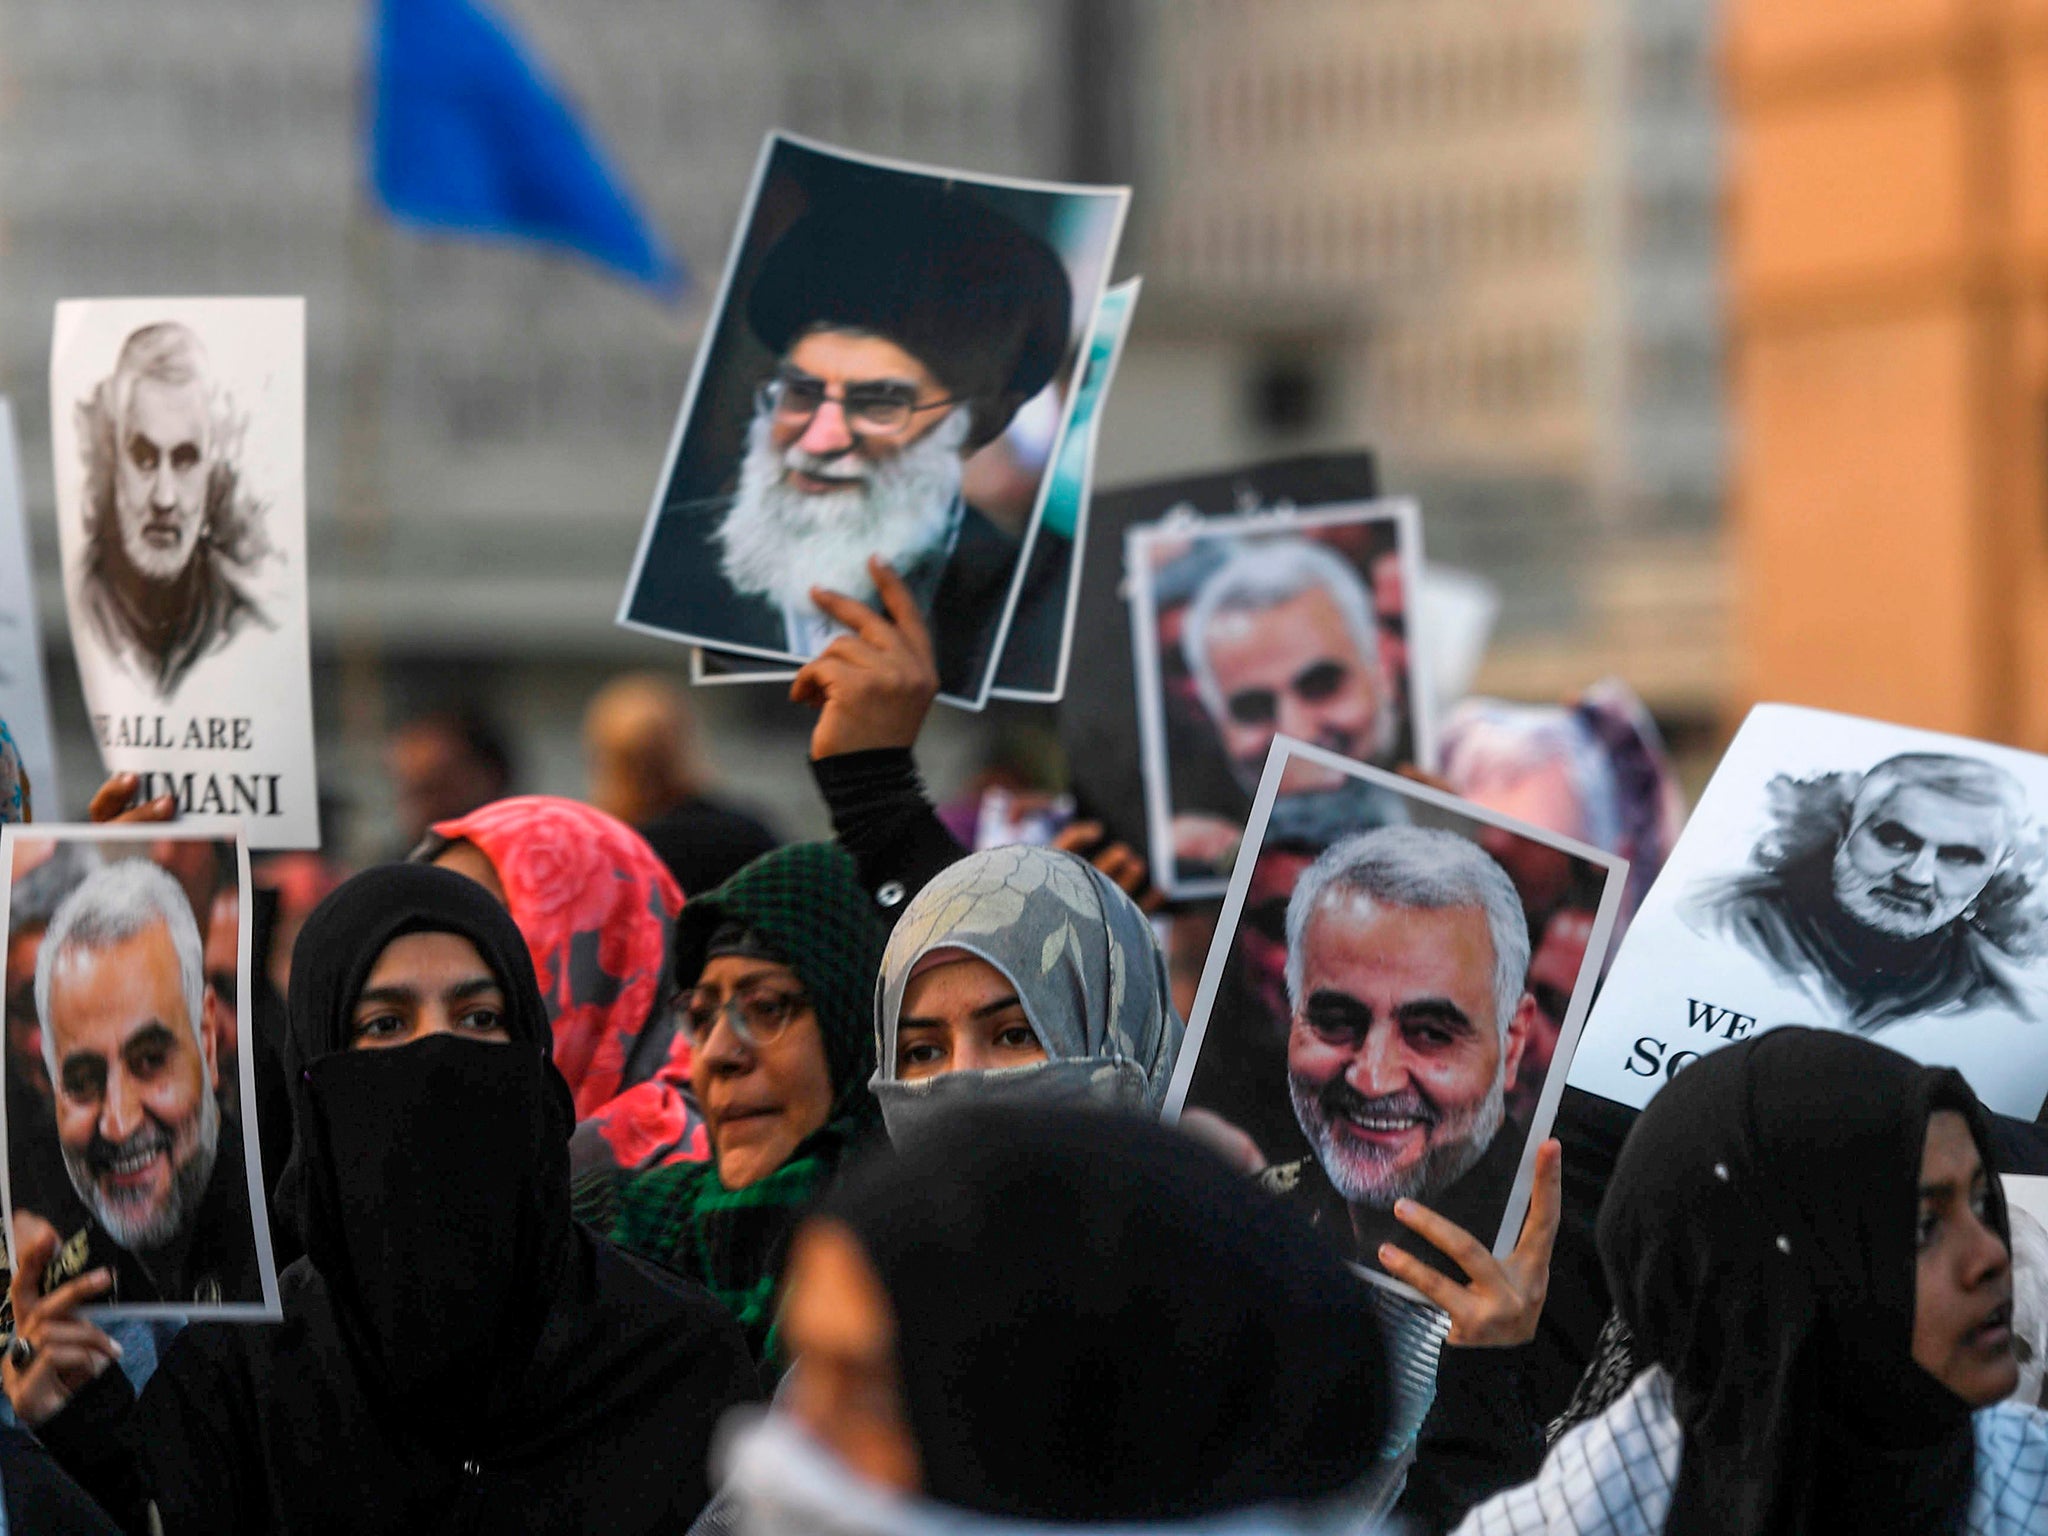 Shia Muslims march to protest against the US airstrike that killed Soleimani